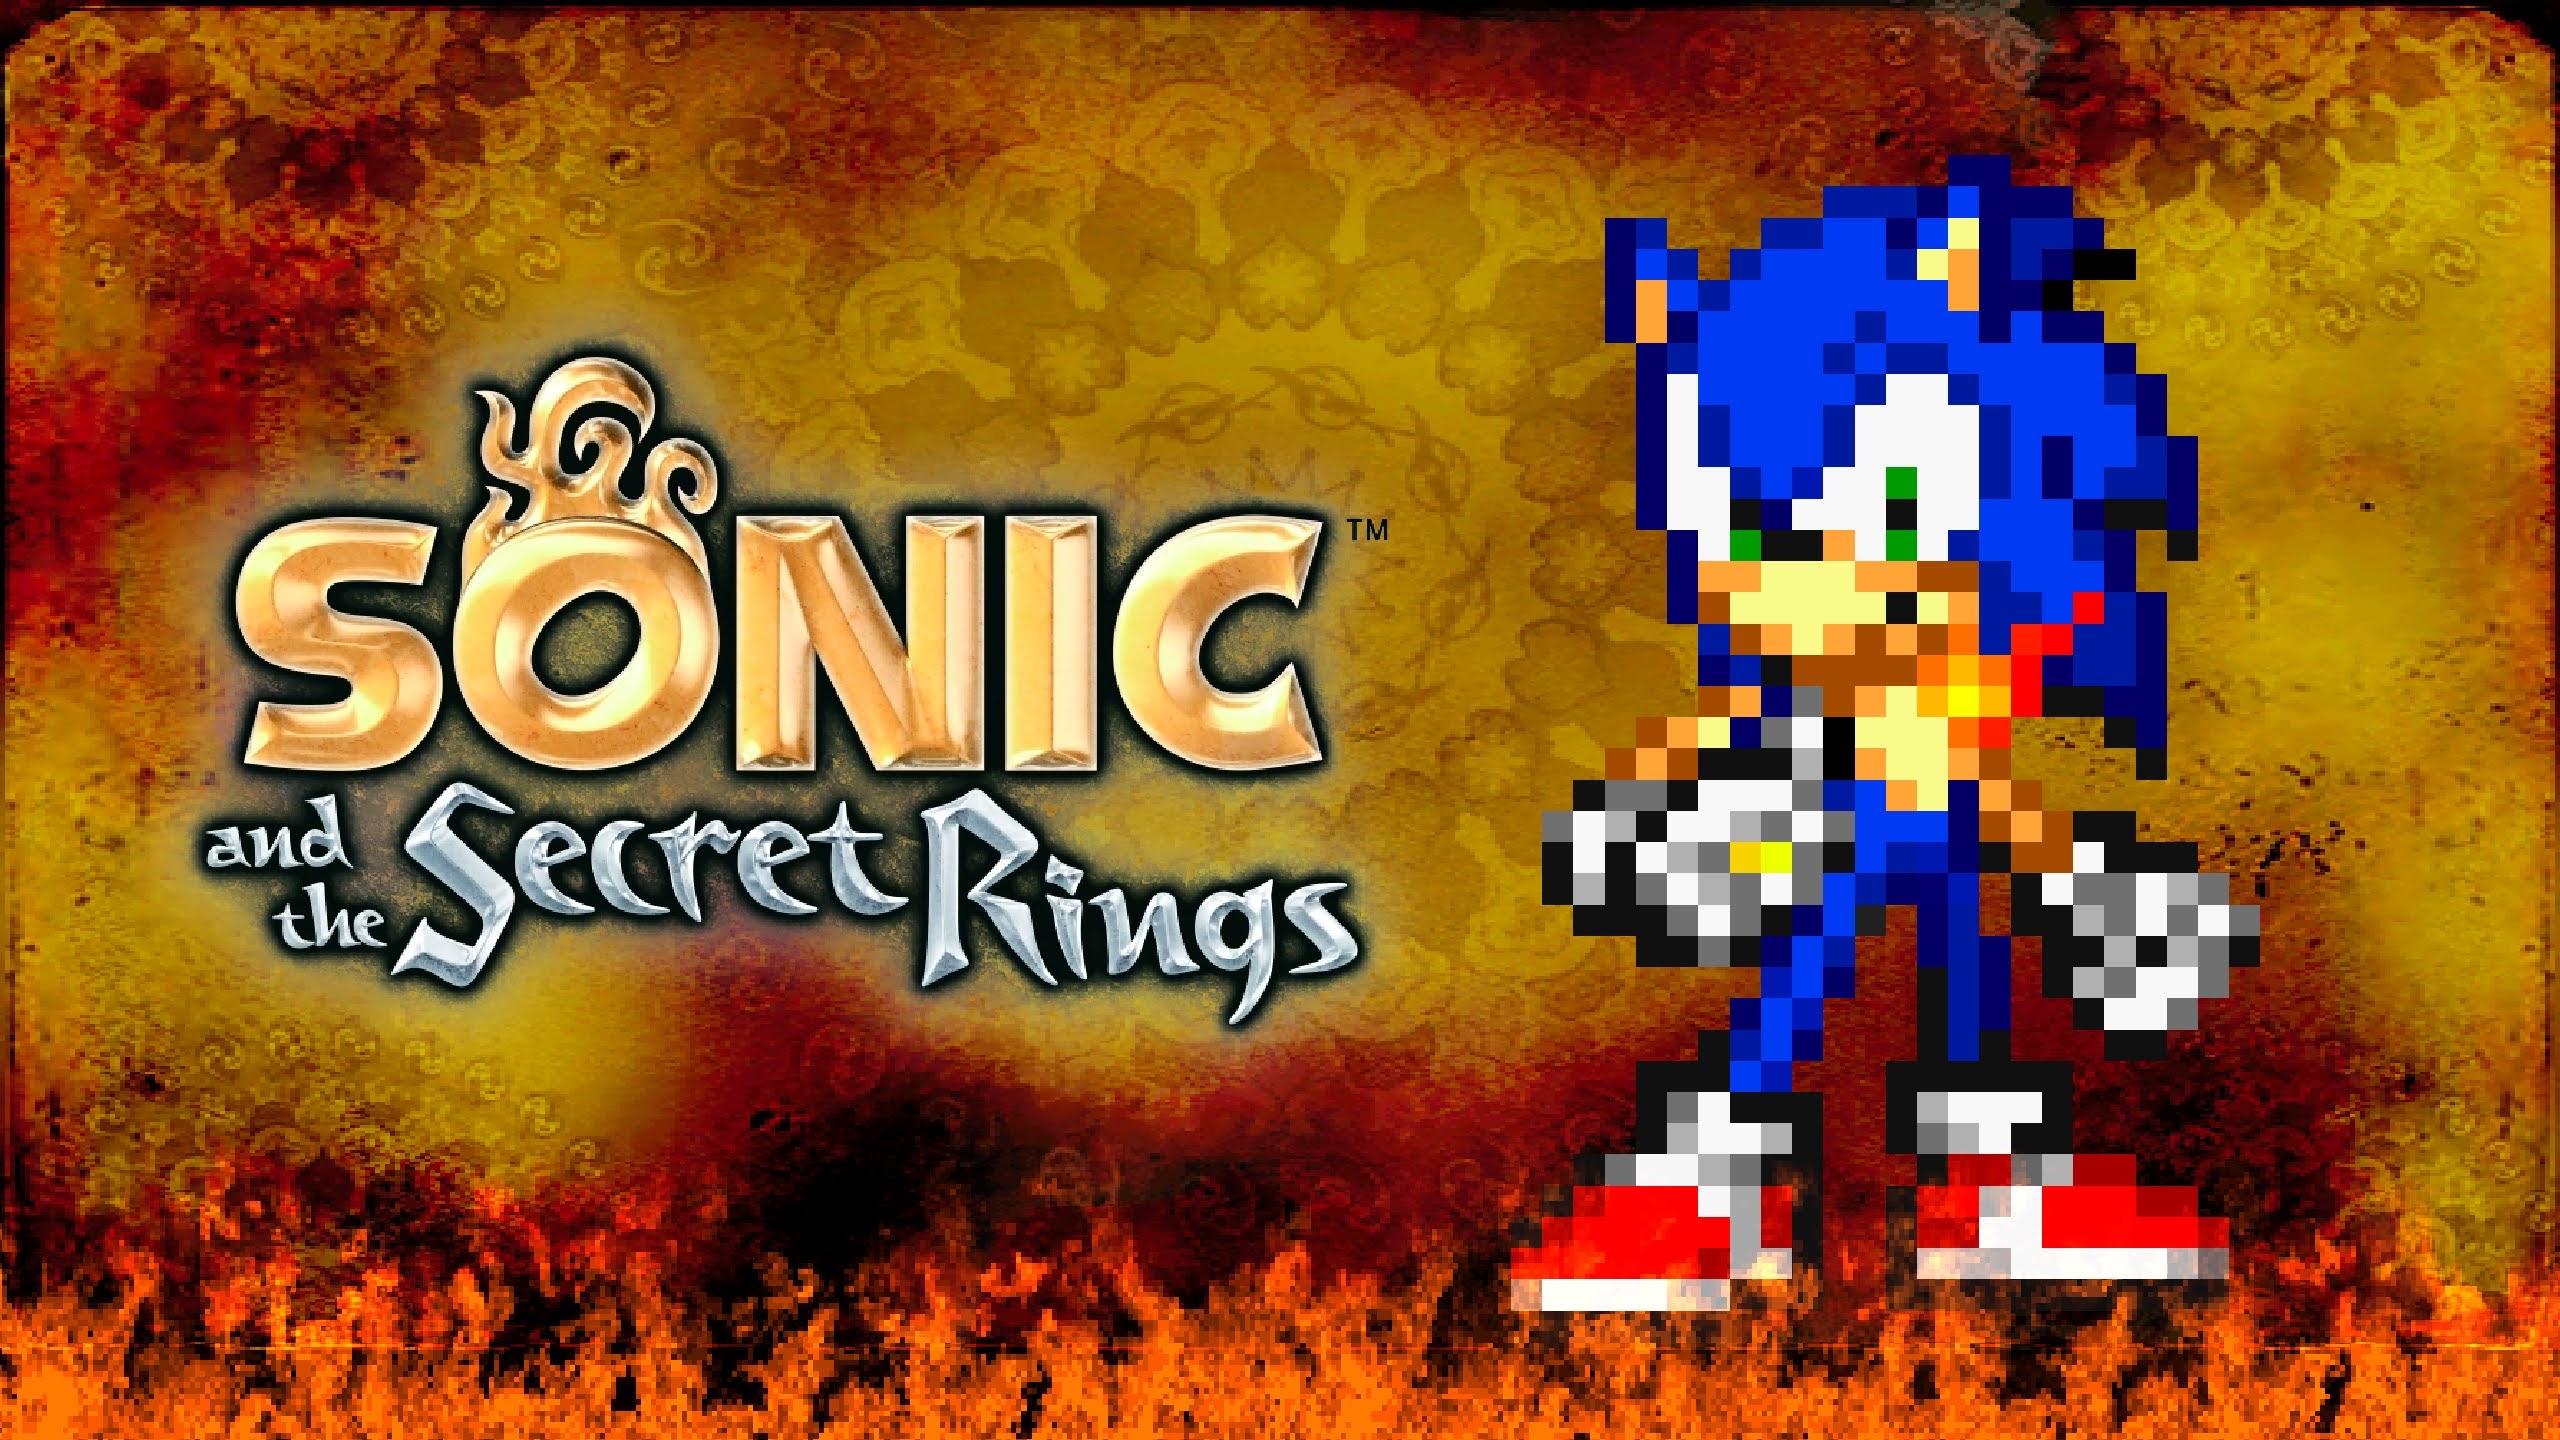 Sonic and the Secret Rings by SKCollabs on DeviantArt